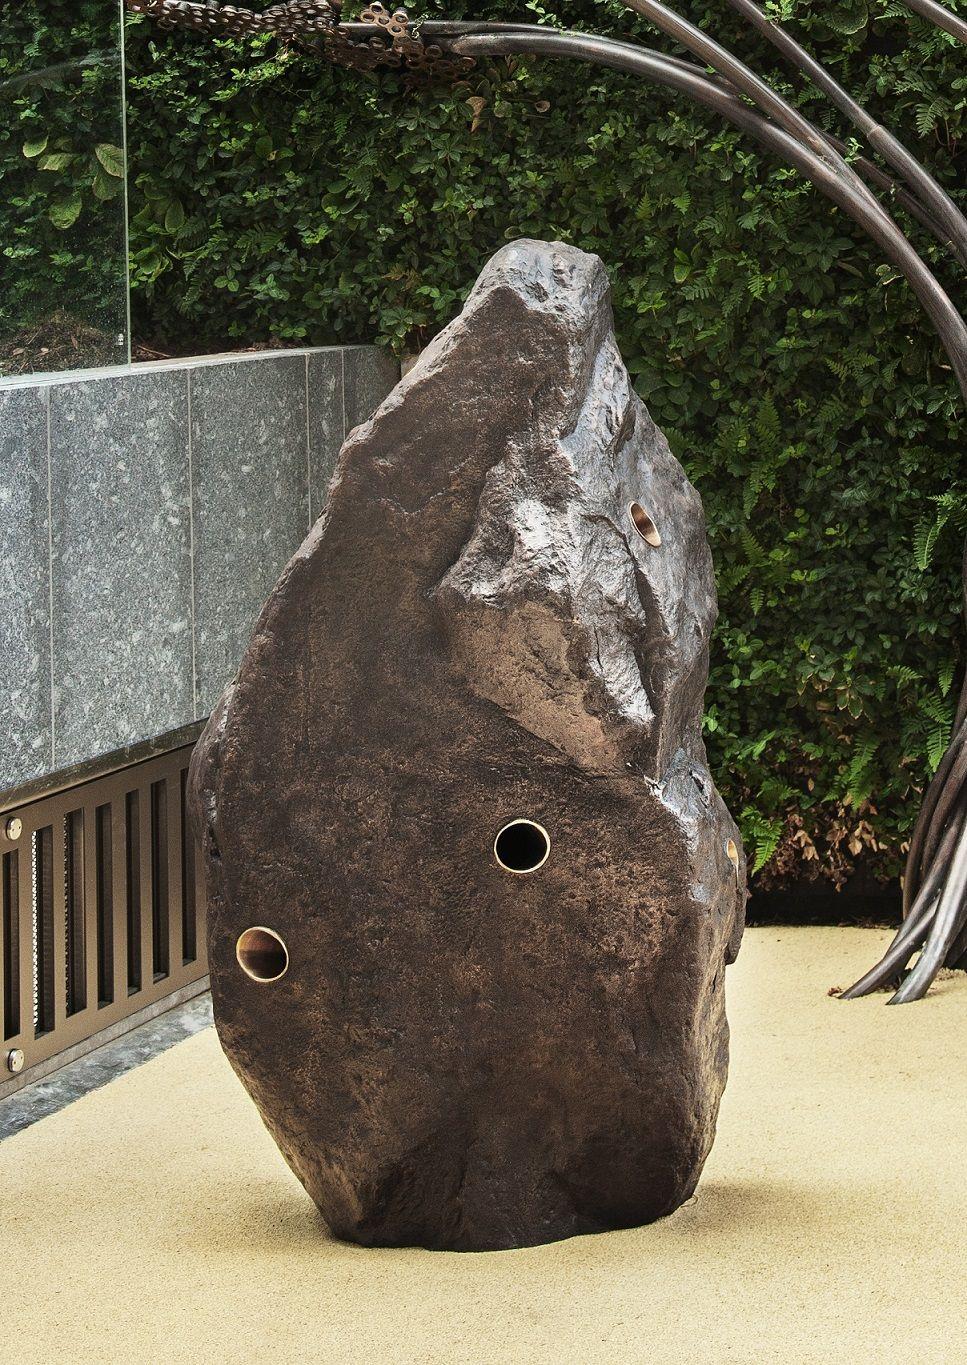 Boulder #1 – The Speaker is a bronze sculpture by contemporary artist Tom Price, dimensions are 170 × 100 × 65 cm (66.9 × 39.4 × 25.6 in). 
This artwork is available on commission. It will be created on the same basis as shown in the images and